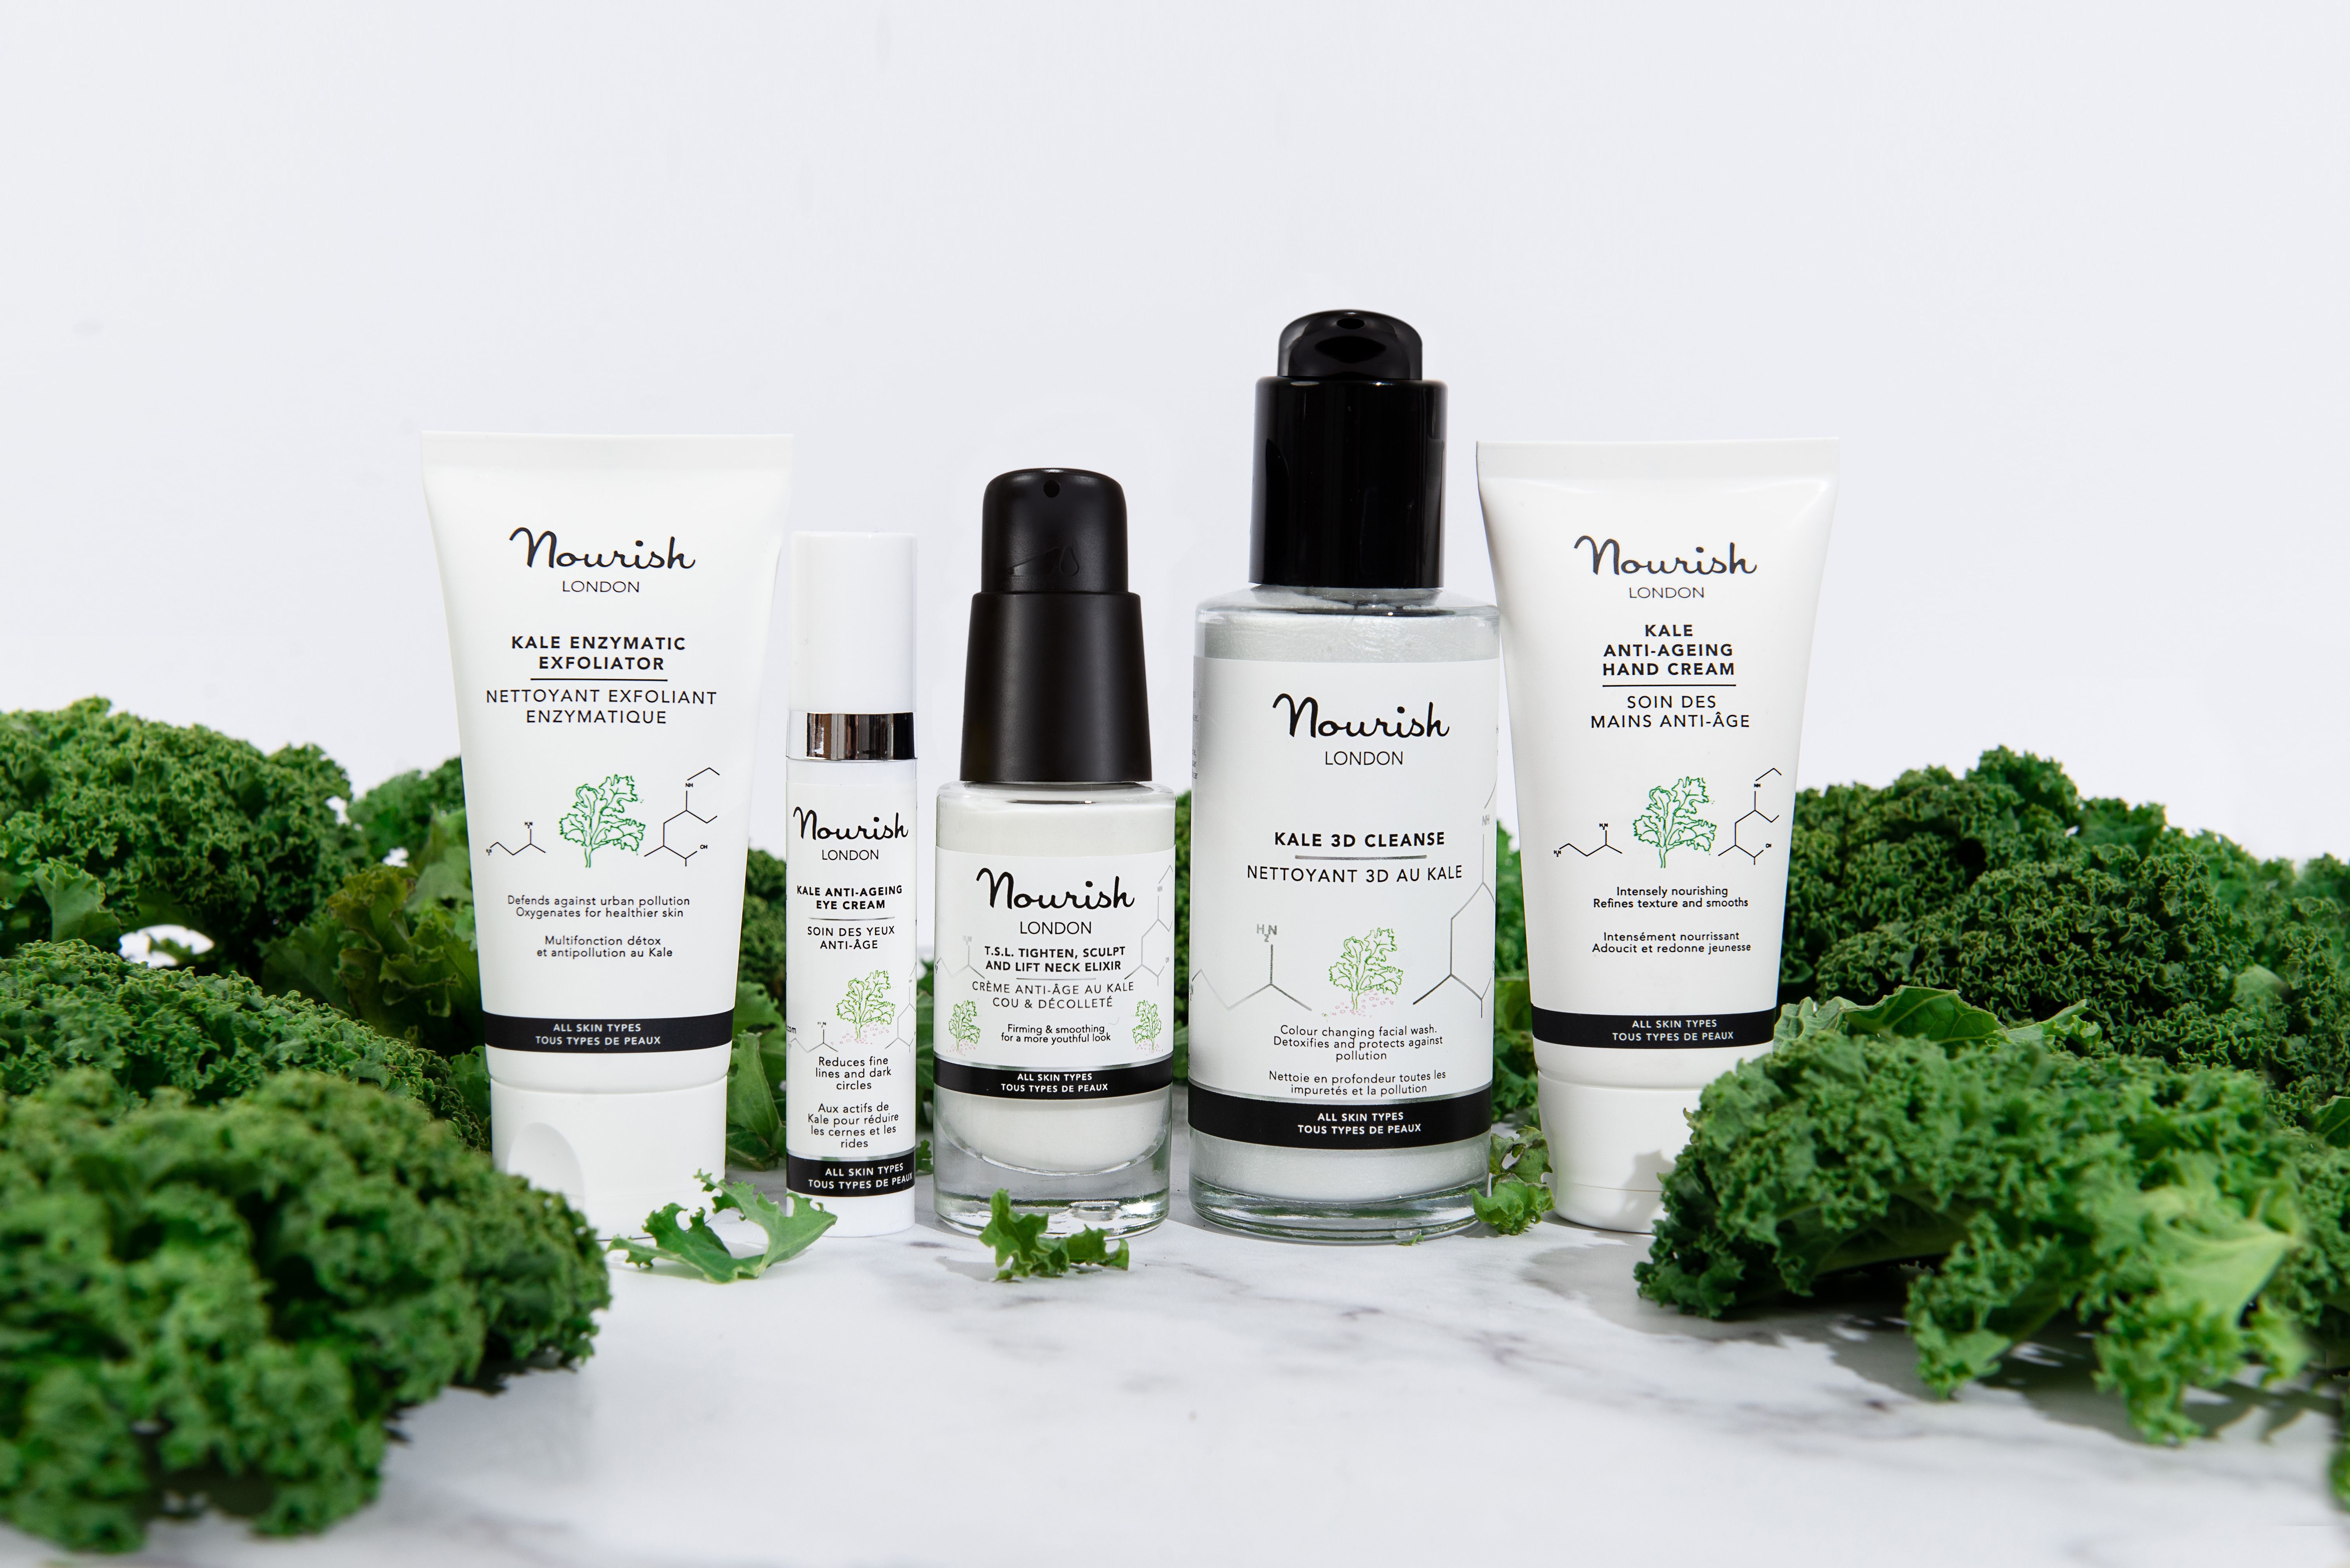 Nourish London, offering scientifically developed, highly effective, organic, vegan & cruelty-free skincare powered by ingredients from nature